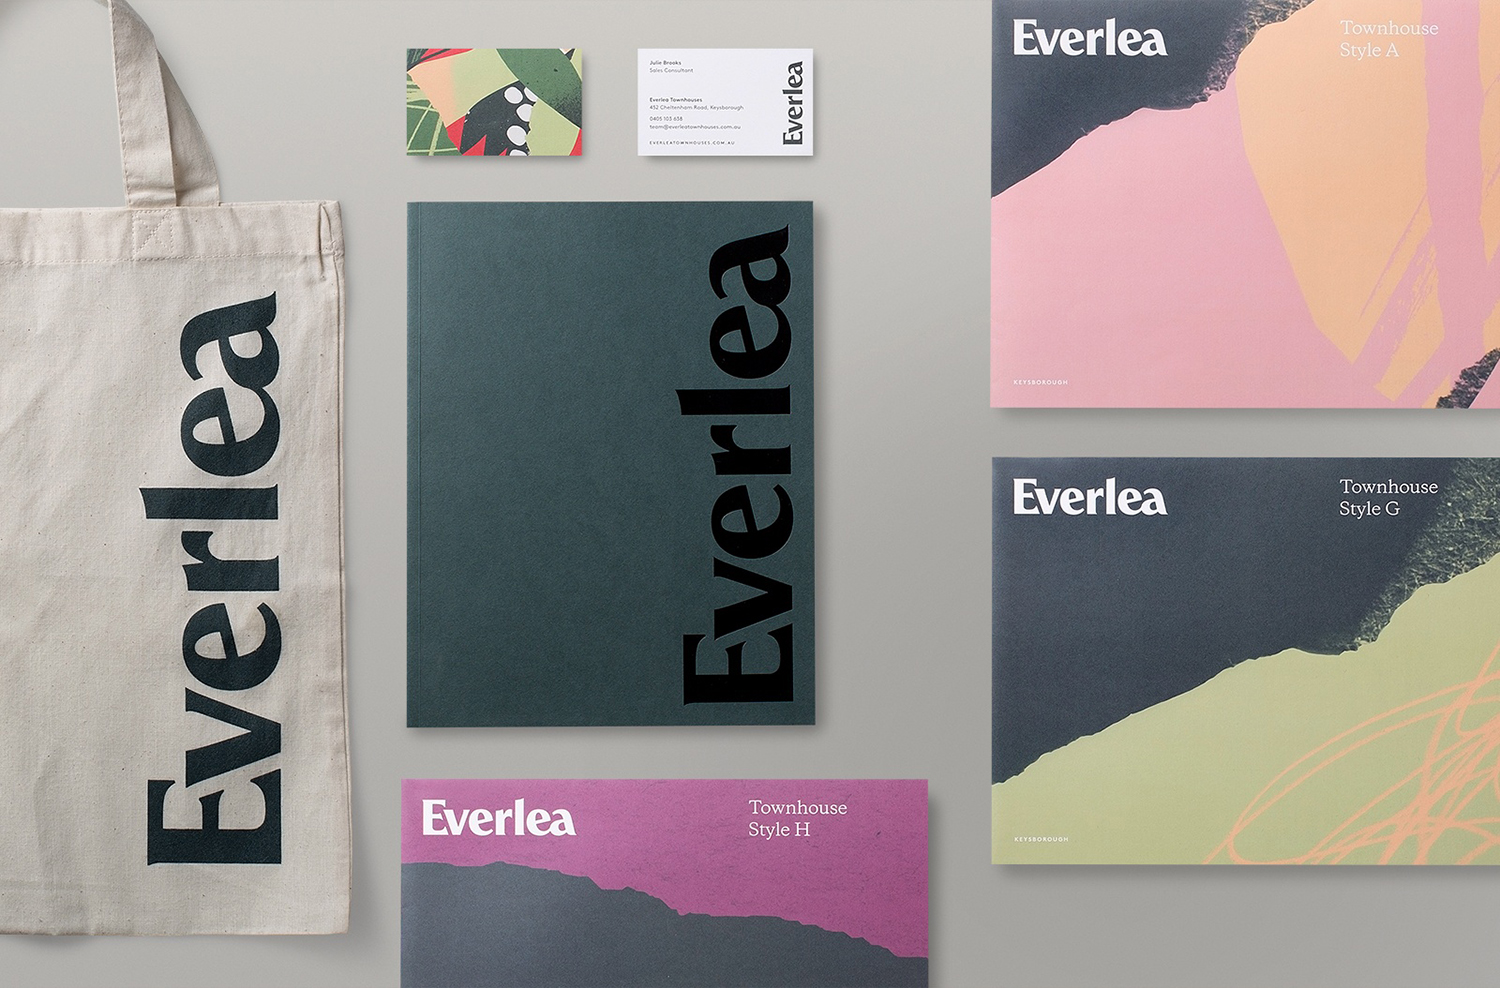 Visual identity and brochure design for Everlea by Studio Brave featuring illustration by Tom Abbiss Smith